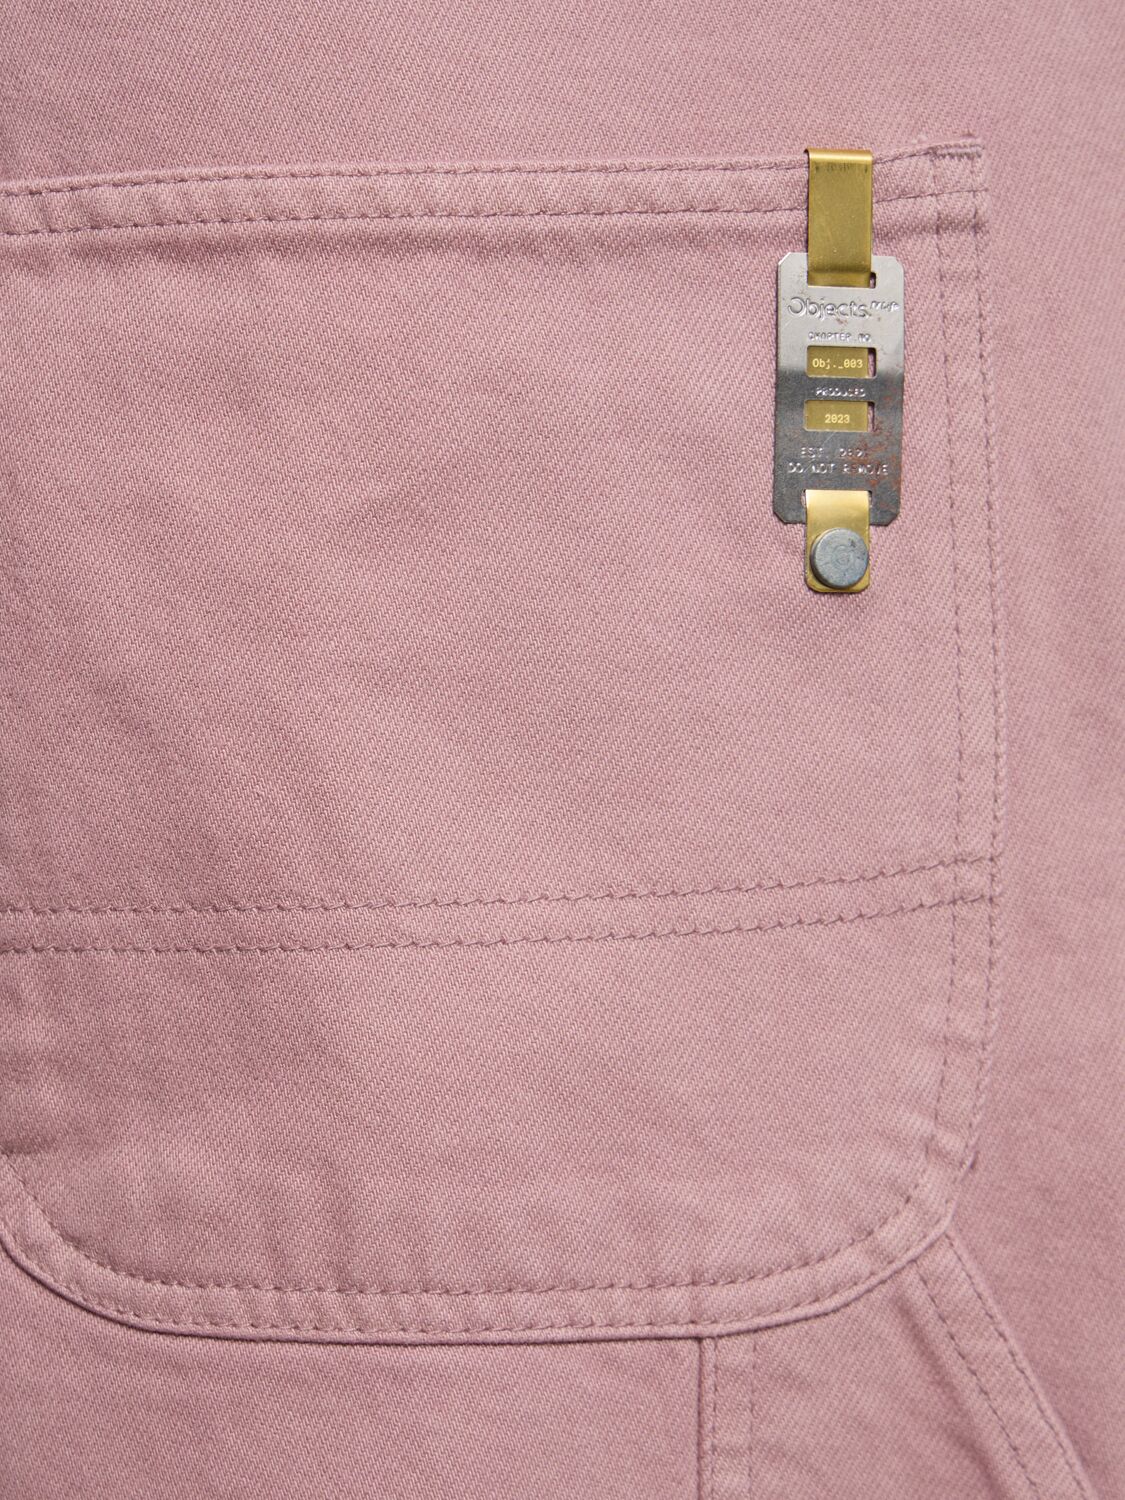 Shop Objects Iv Life 27cm Baggy Cotton Denim Jeans In Pink